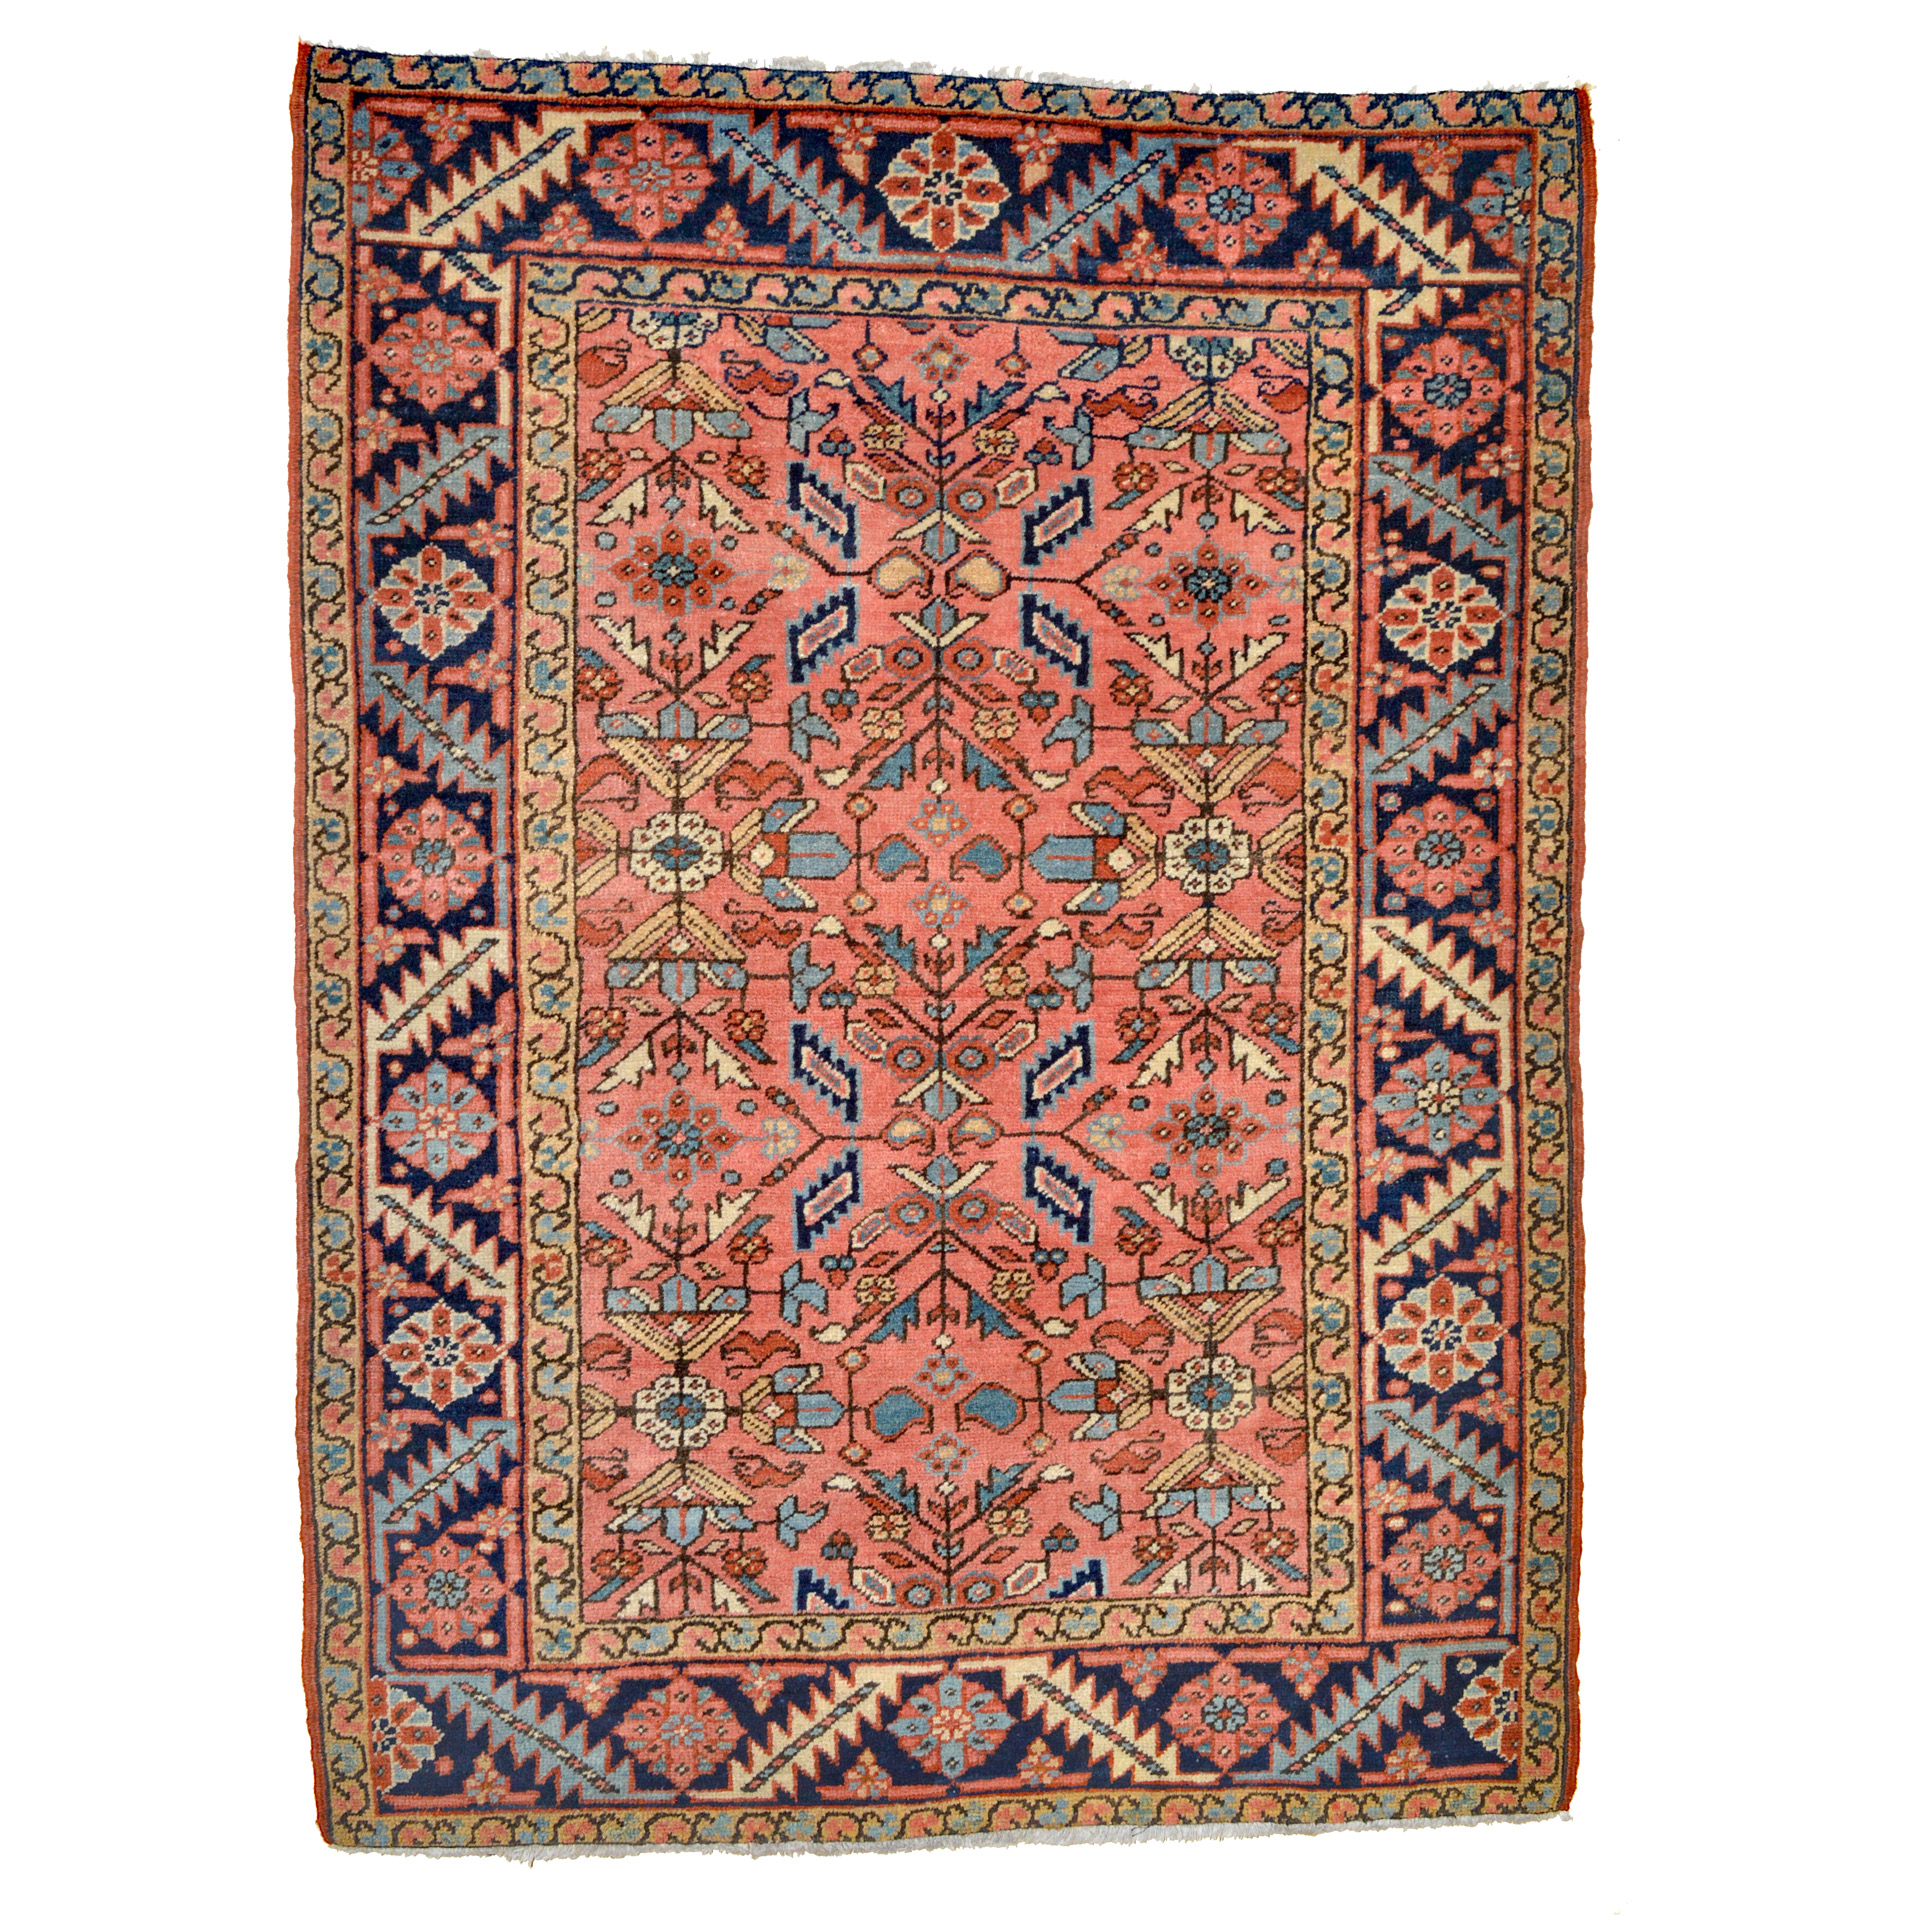 Douglas Stock Gallery offers one of the finest selections of antique Oriental rugs in New England. Based in the Boston area but with clients for antique rugs across the United States, Douglas Stock Gallery offers antique Persian rugs and antique Caucasian rugs across a wide price and style range. An antique Persian Heriz rug measuring approximately 4'5" x 6' and with an uncommon coral color field with an all-over design of stylized leaves and flowers that is framed by a navy blue border, circa 1920.